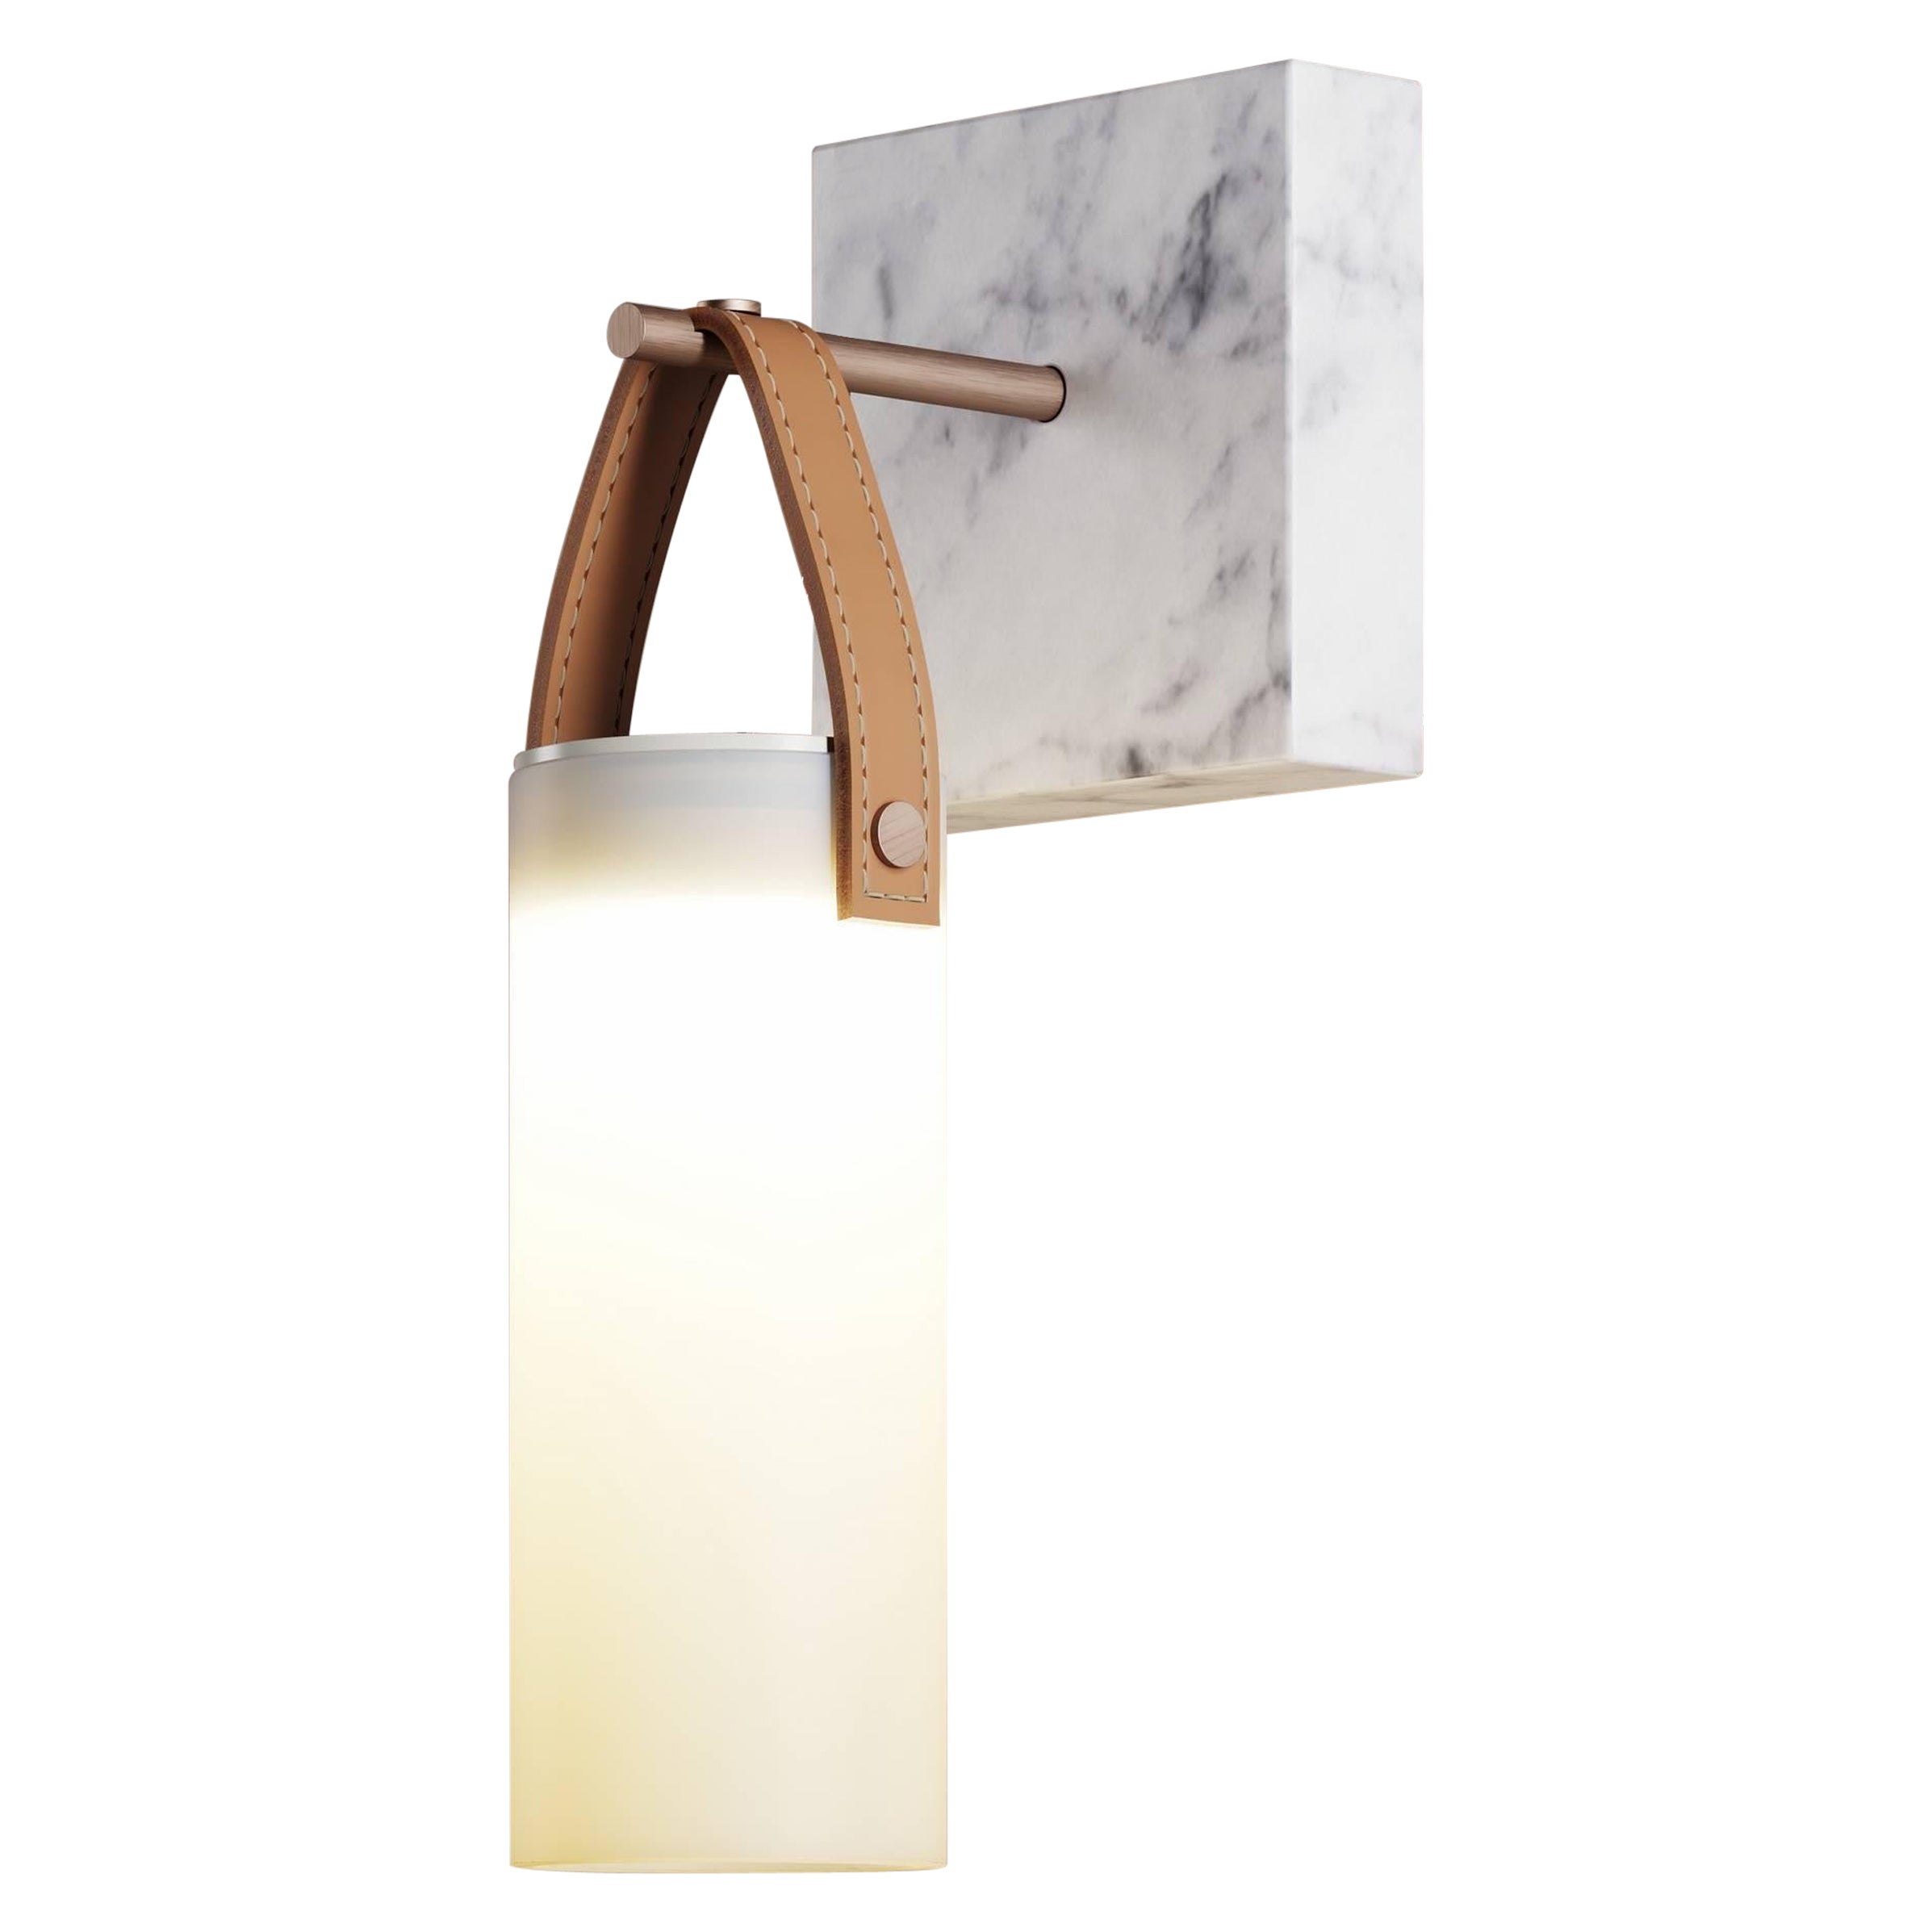 "Galerie" Wall Lamp Designed by Federico Peri for FontanaArte